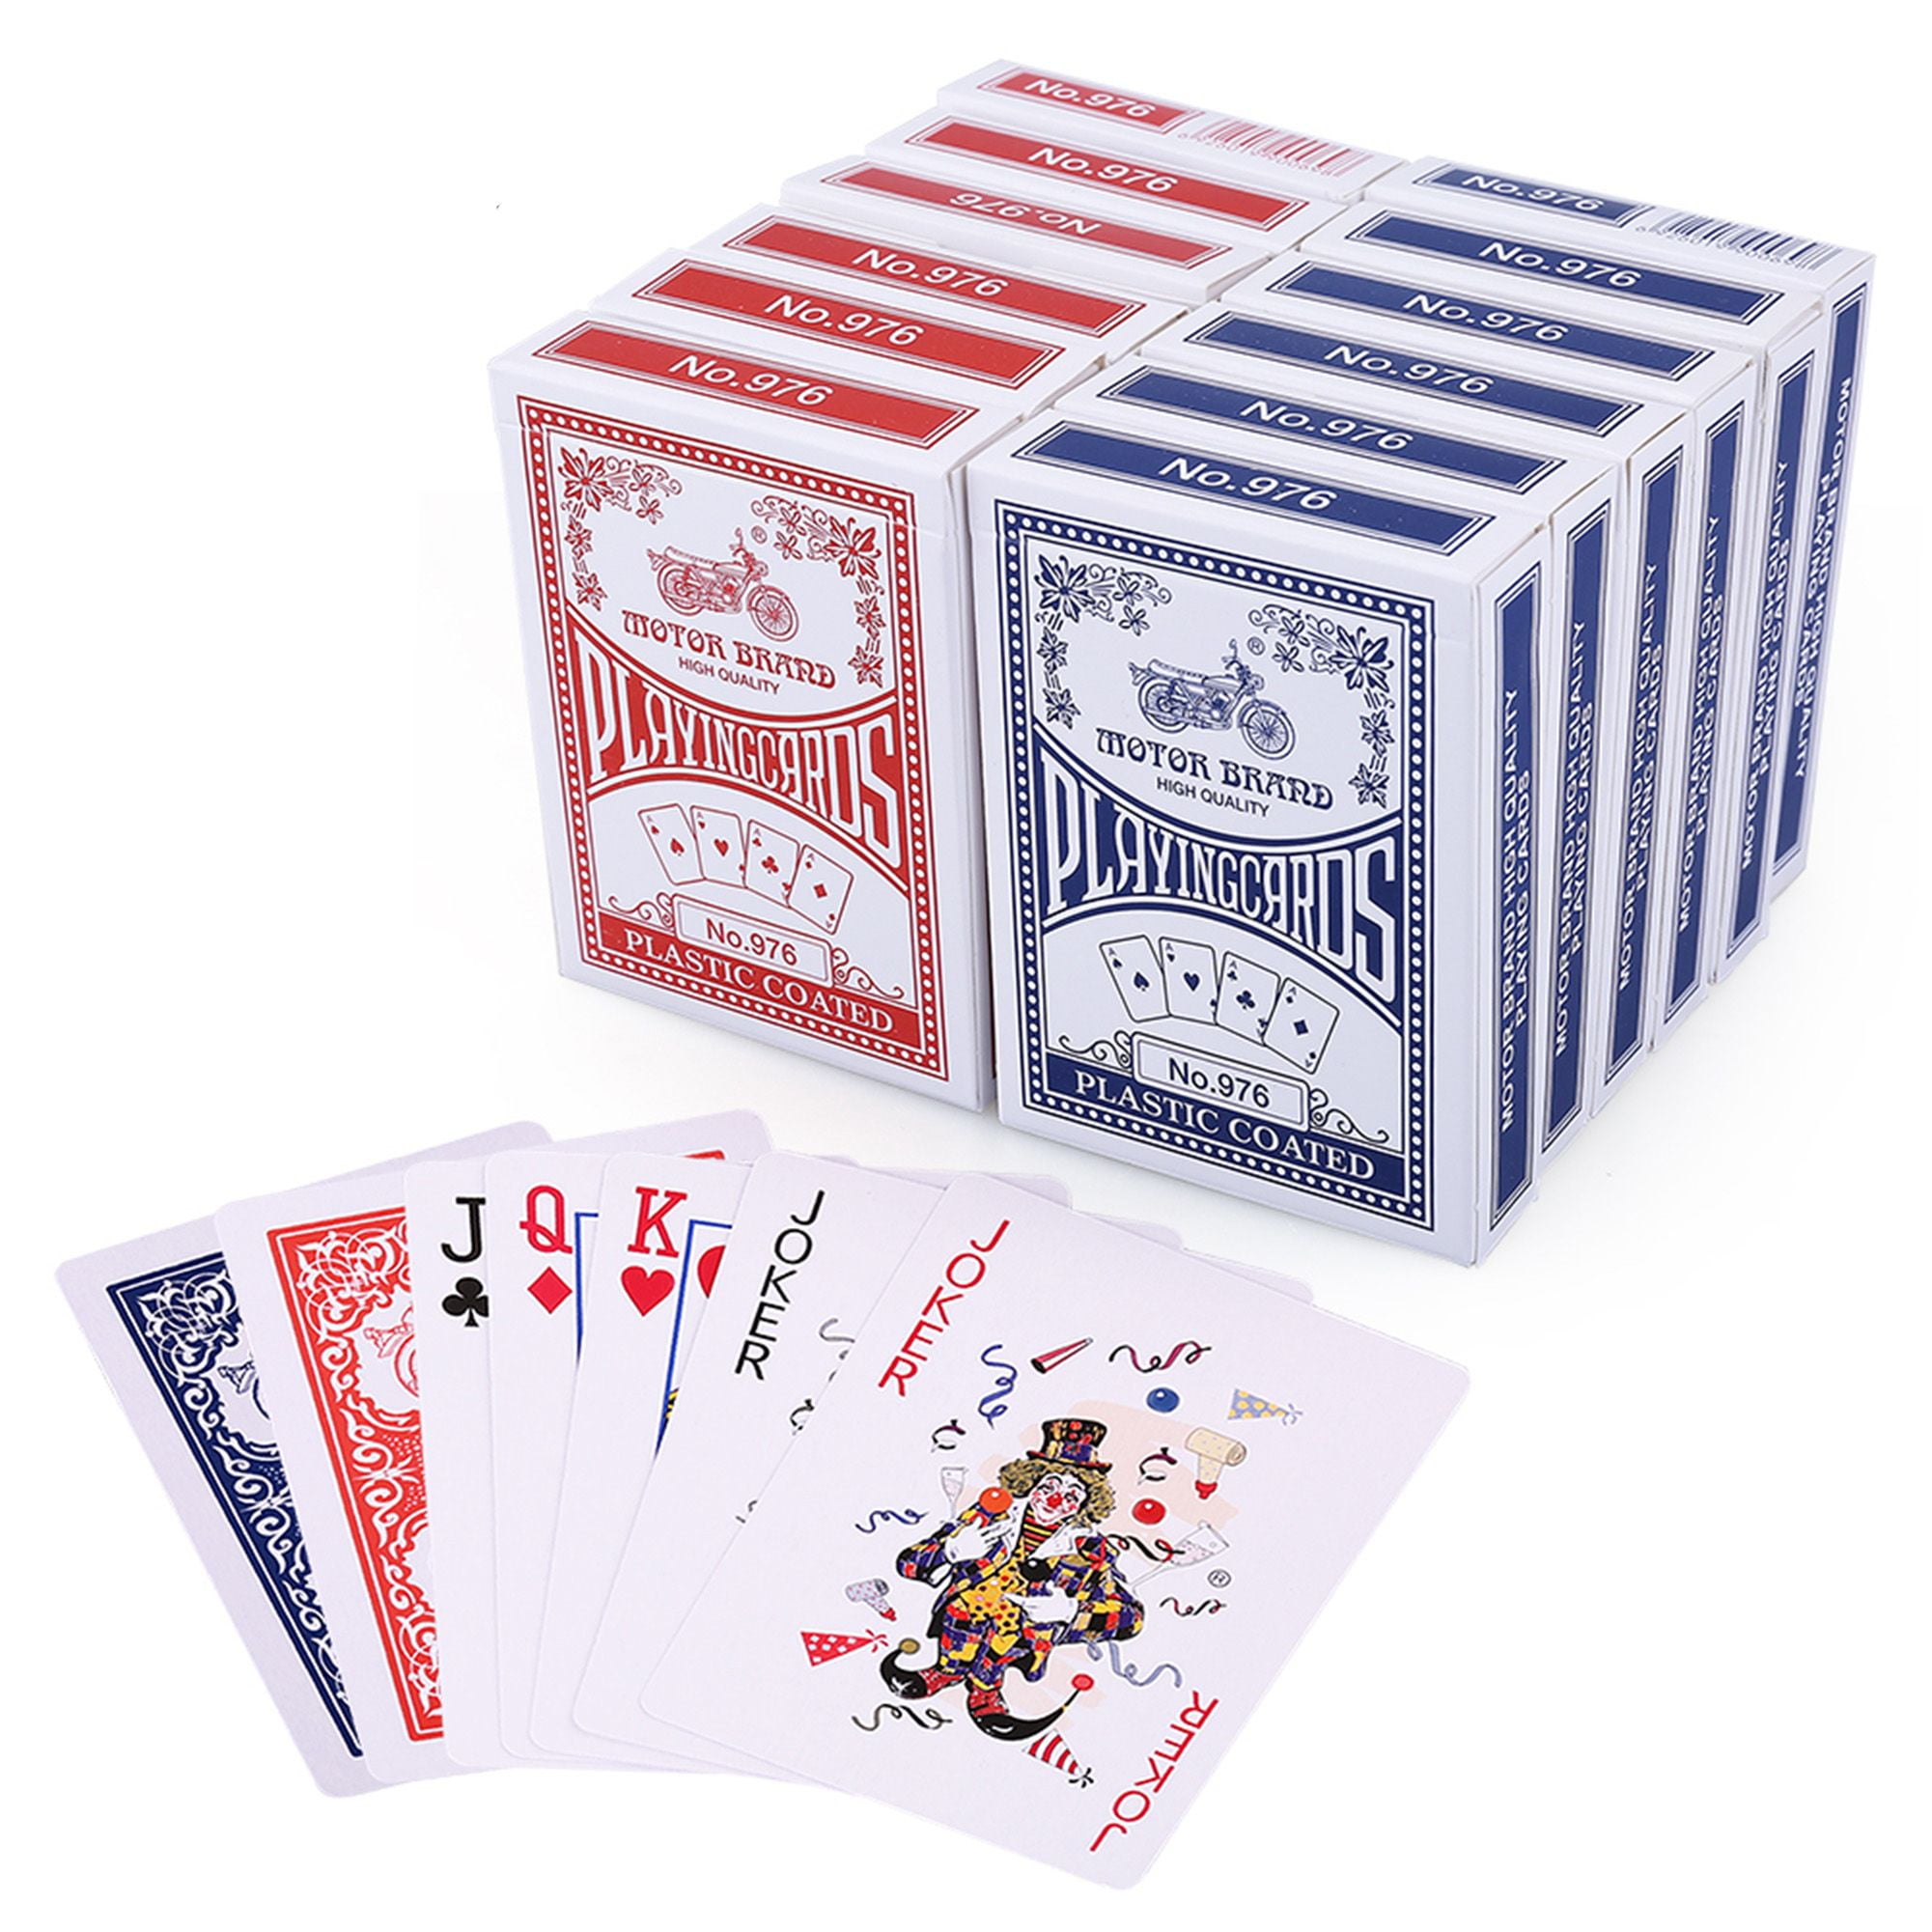 2 x Deck of Professional Plastic Coated Playing Cards Bridge Size 52 cards Blue 